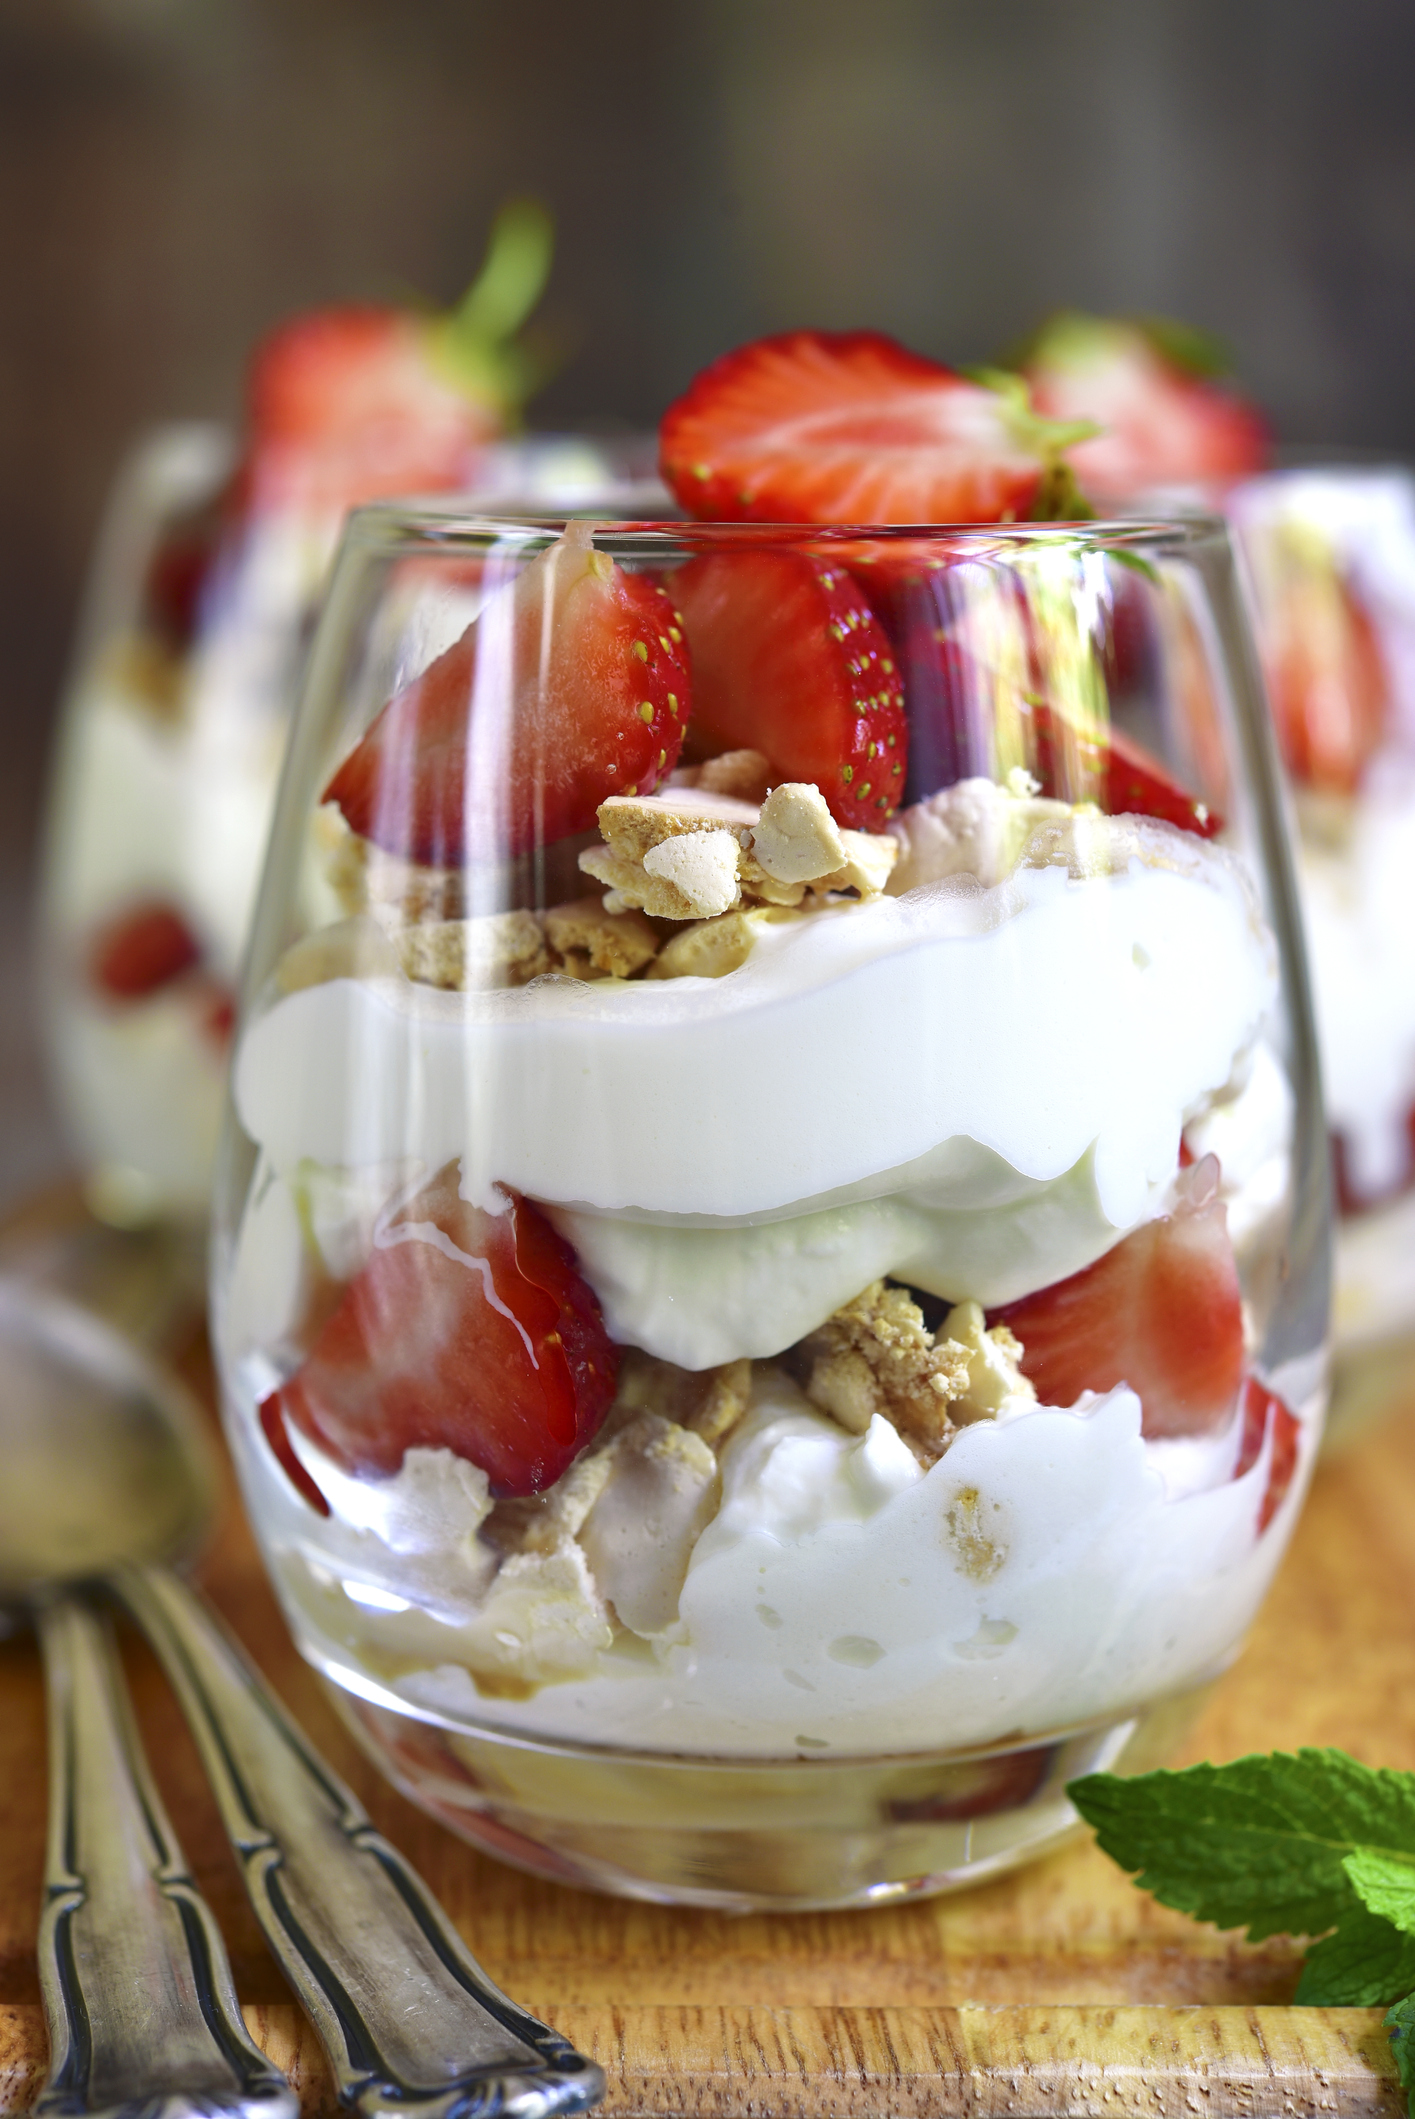 Delisious traditional english dessert eton mess with strawberry on a wooden background.